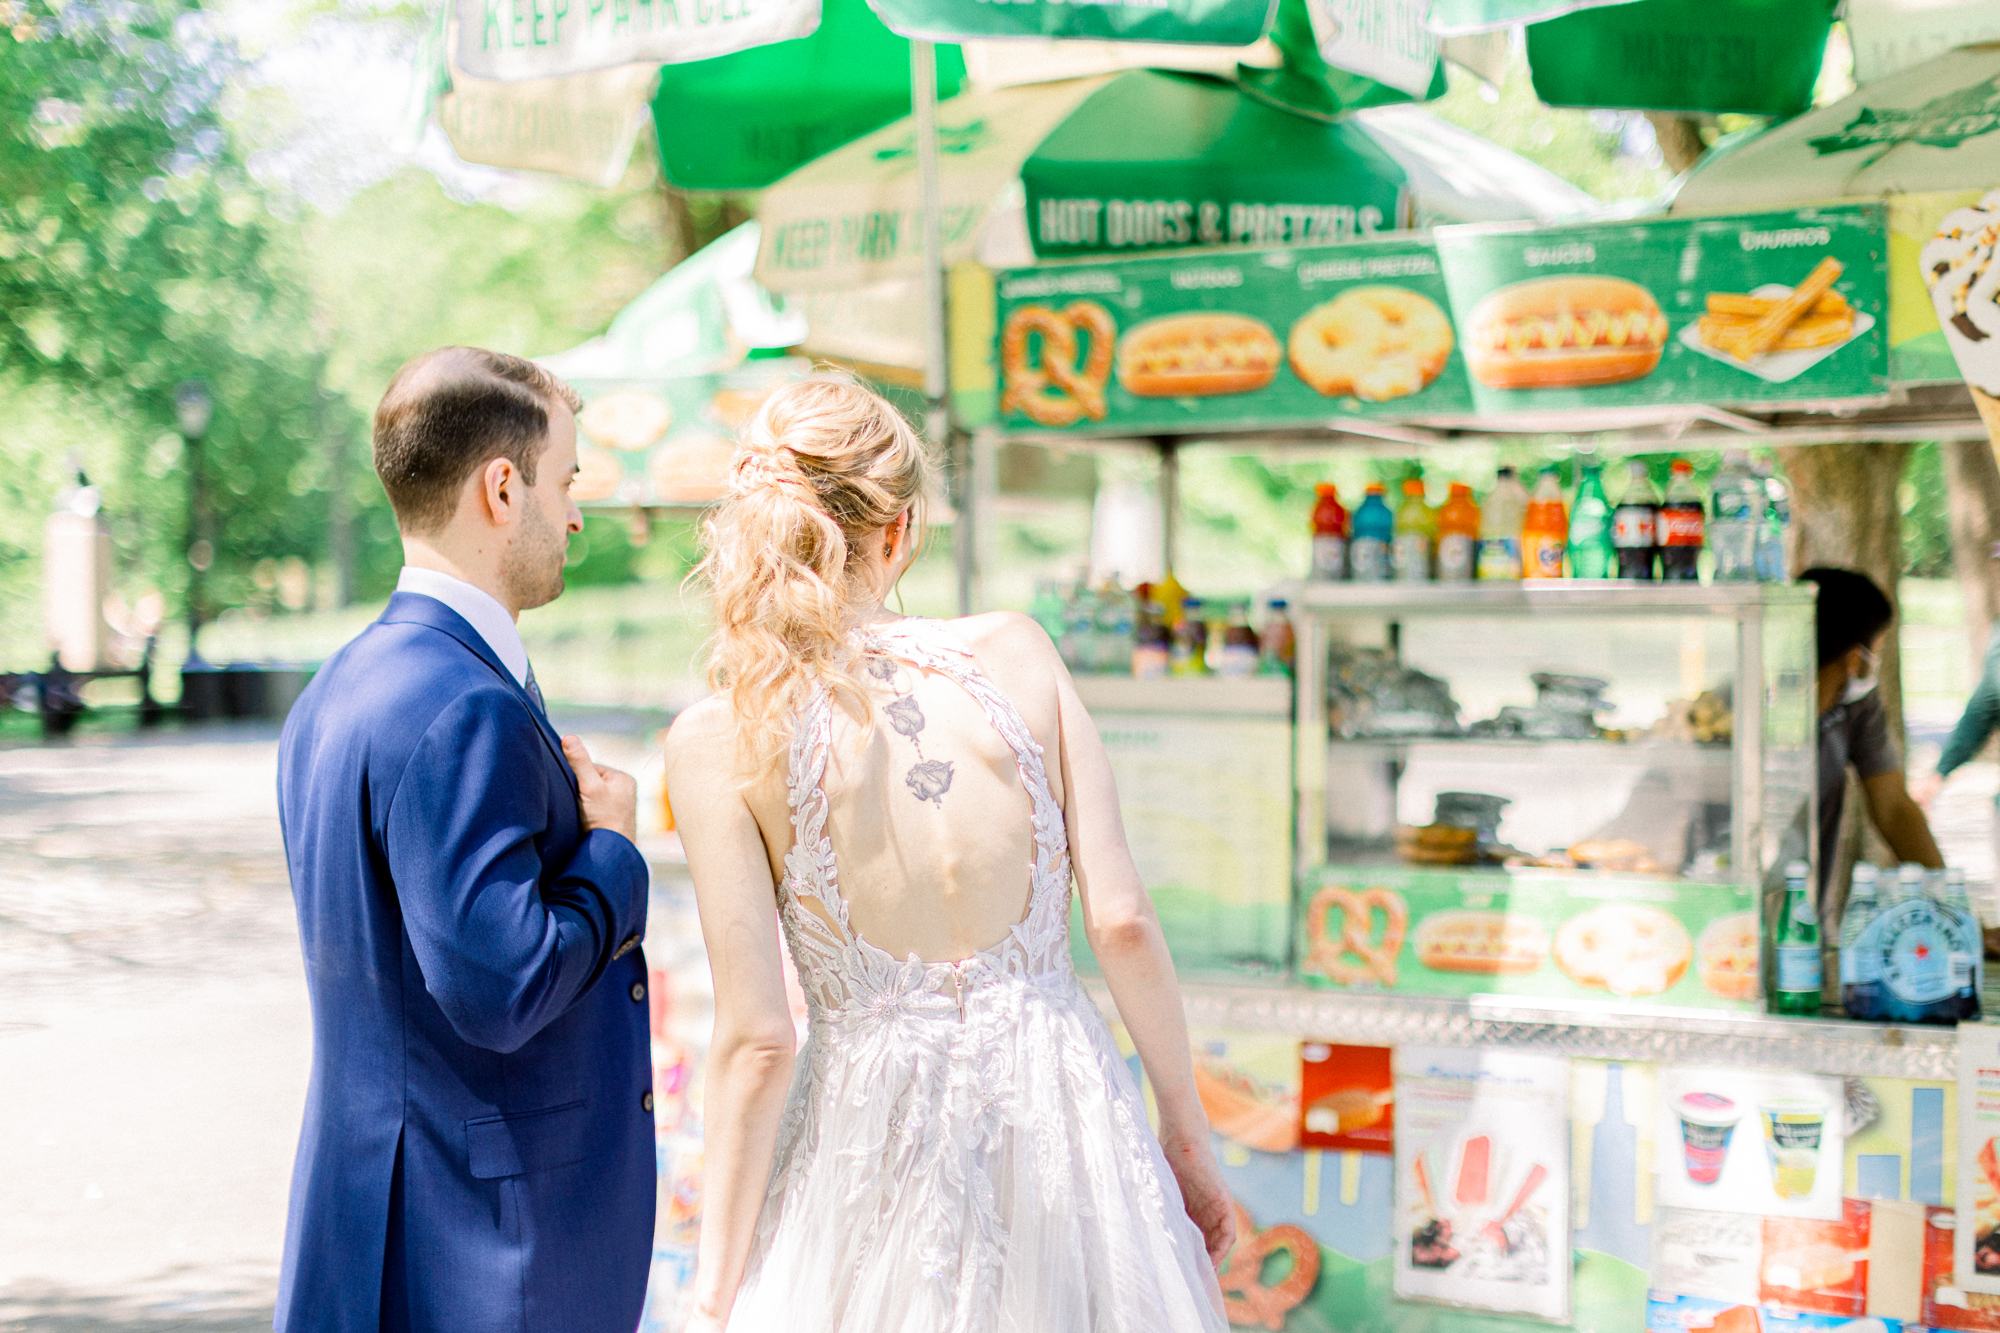 Whimsical Elopement Photos in Central Park's Spring Wisteria Pergola